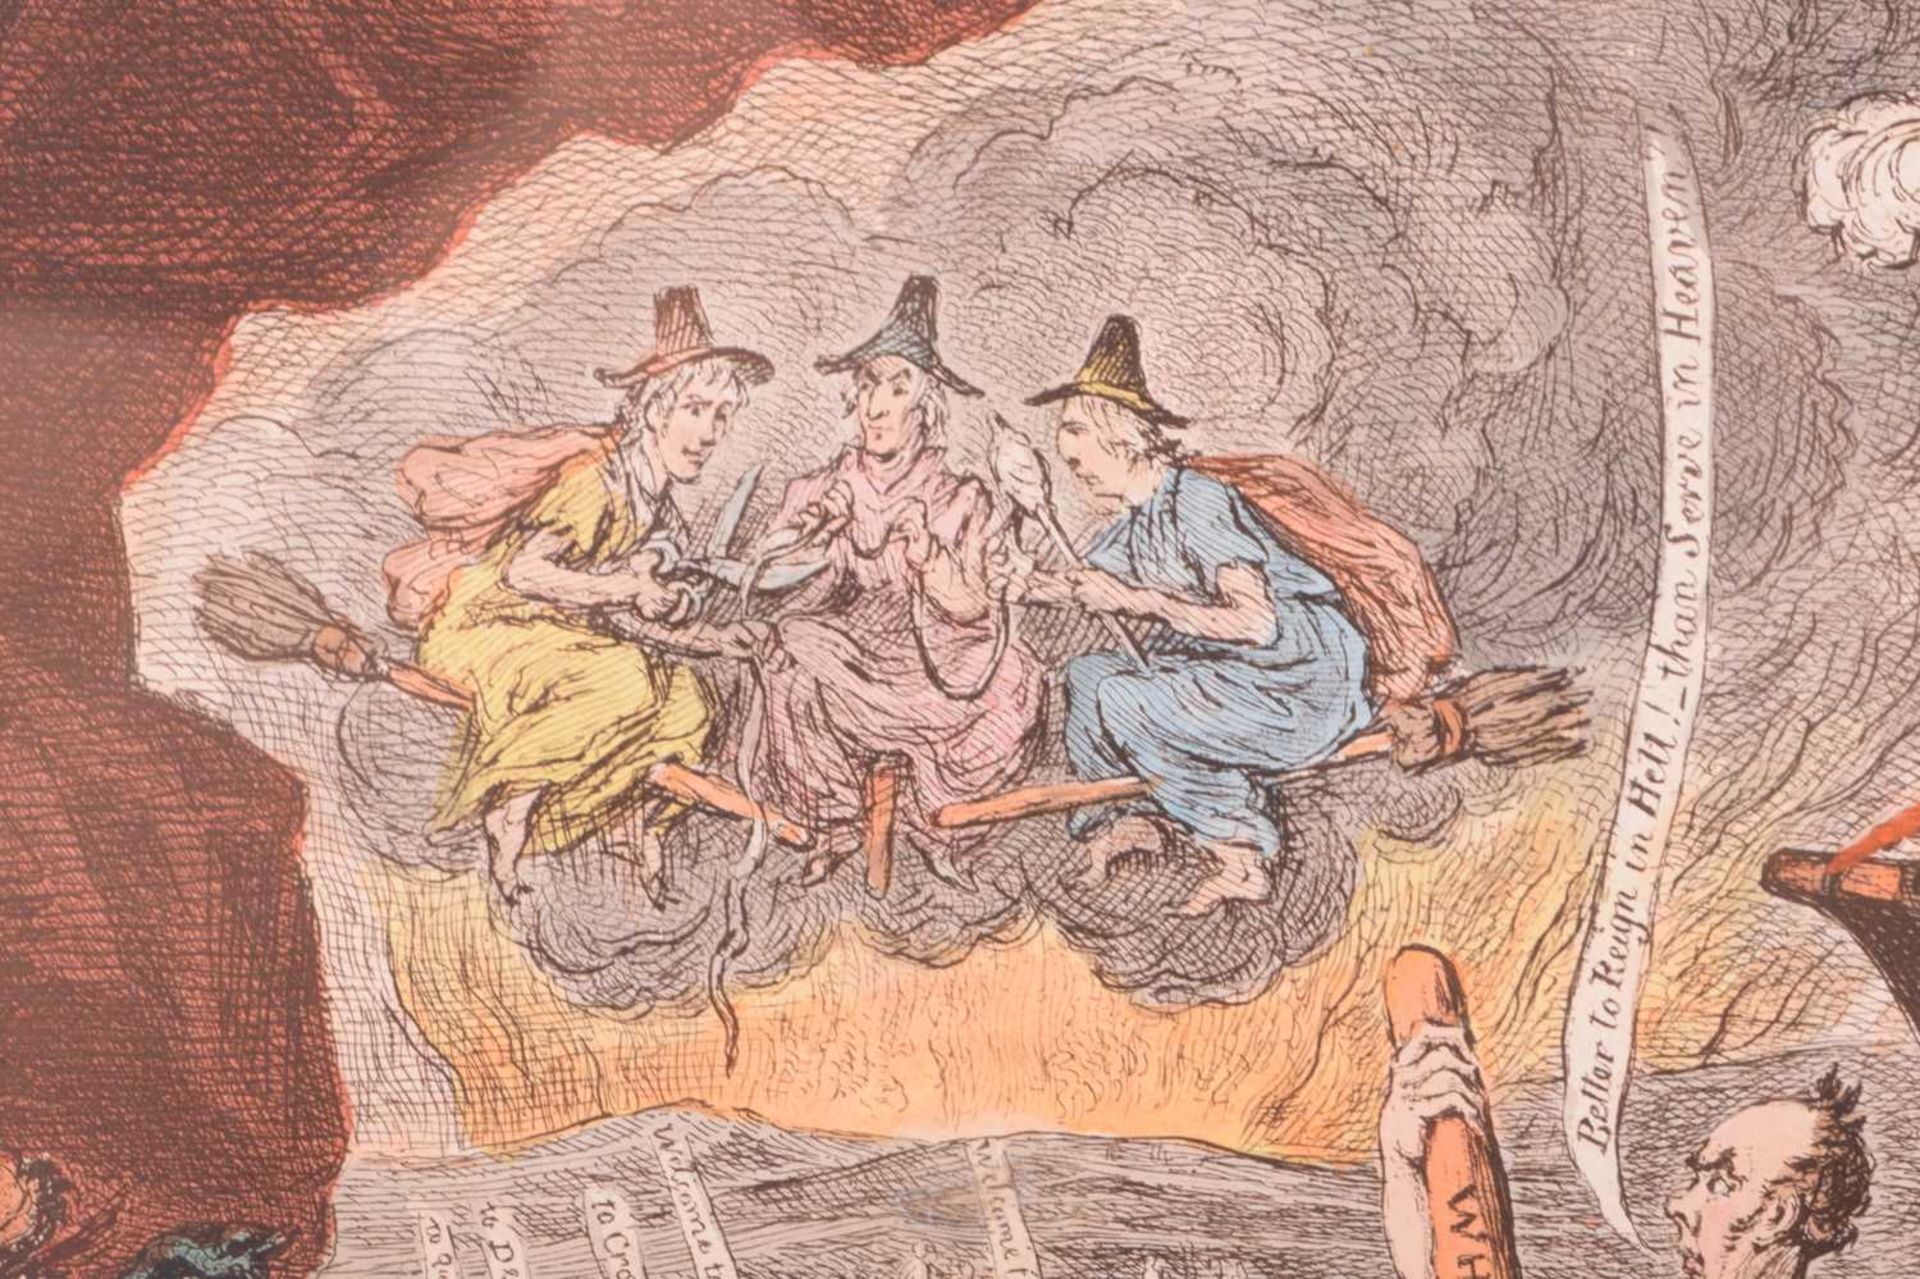 After James Gillray (1756-1815), 'Charon's Boat or the Ghosts of "all the Talents" taking their last - Image 7 of 16